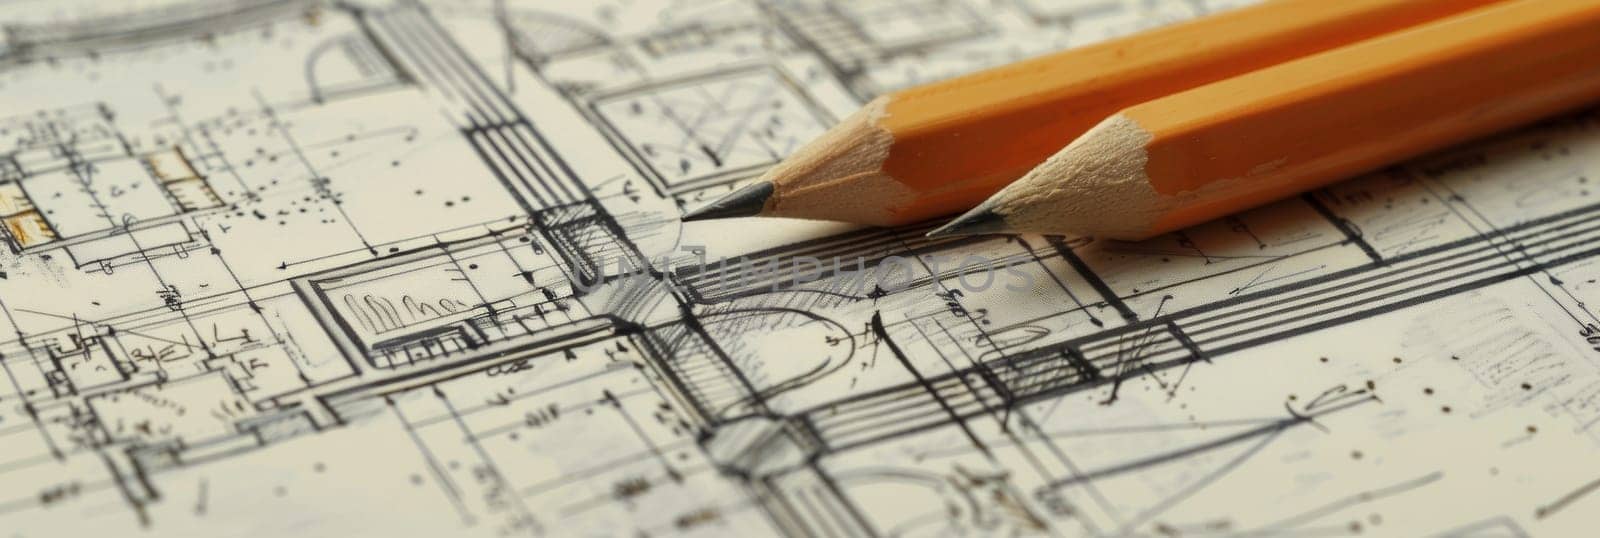 A pencil lies elegantly upon a blueprint, symbolizing creativity and precision in design and construction projects.